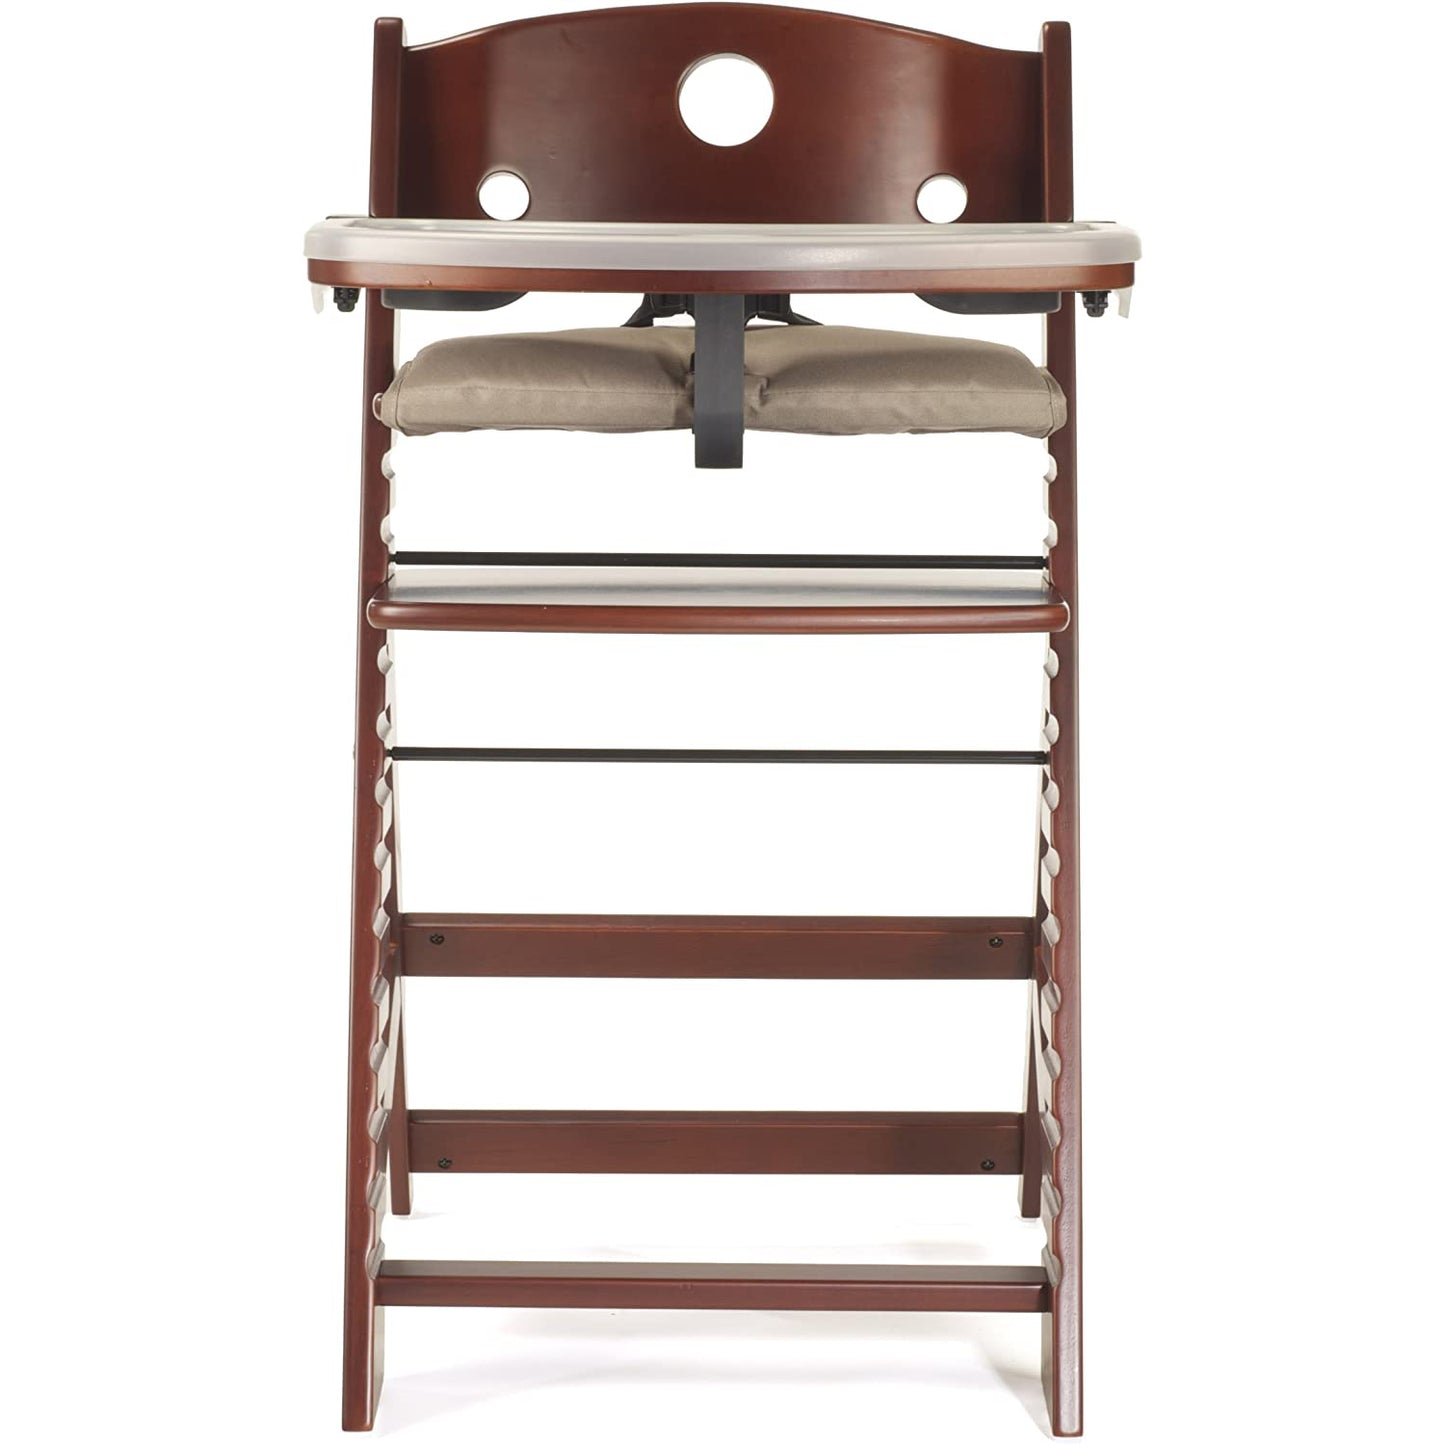 Keekaroo Height Right HIGH Chair (All-In-One) - Mahogany